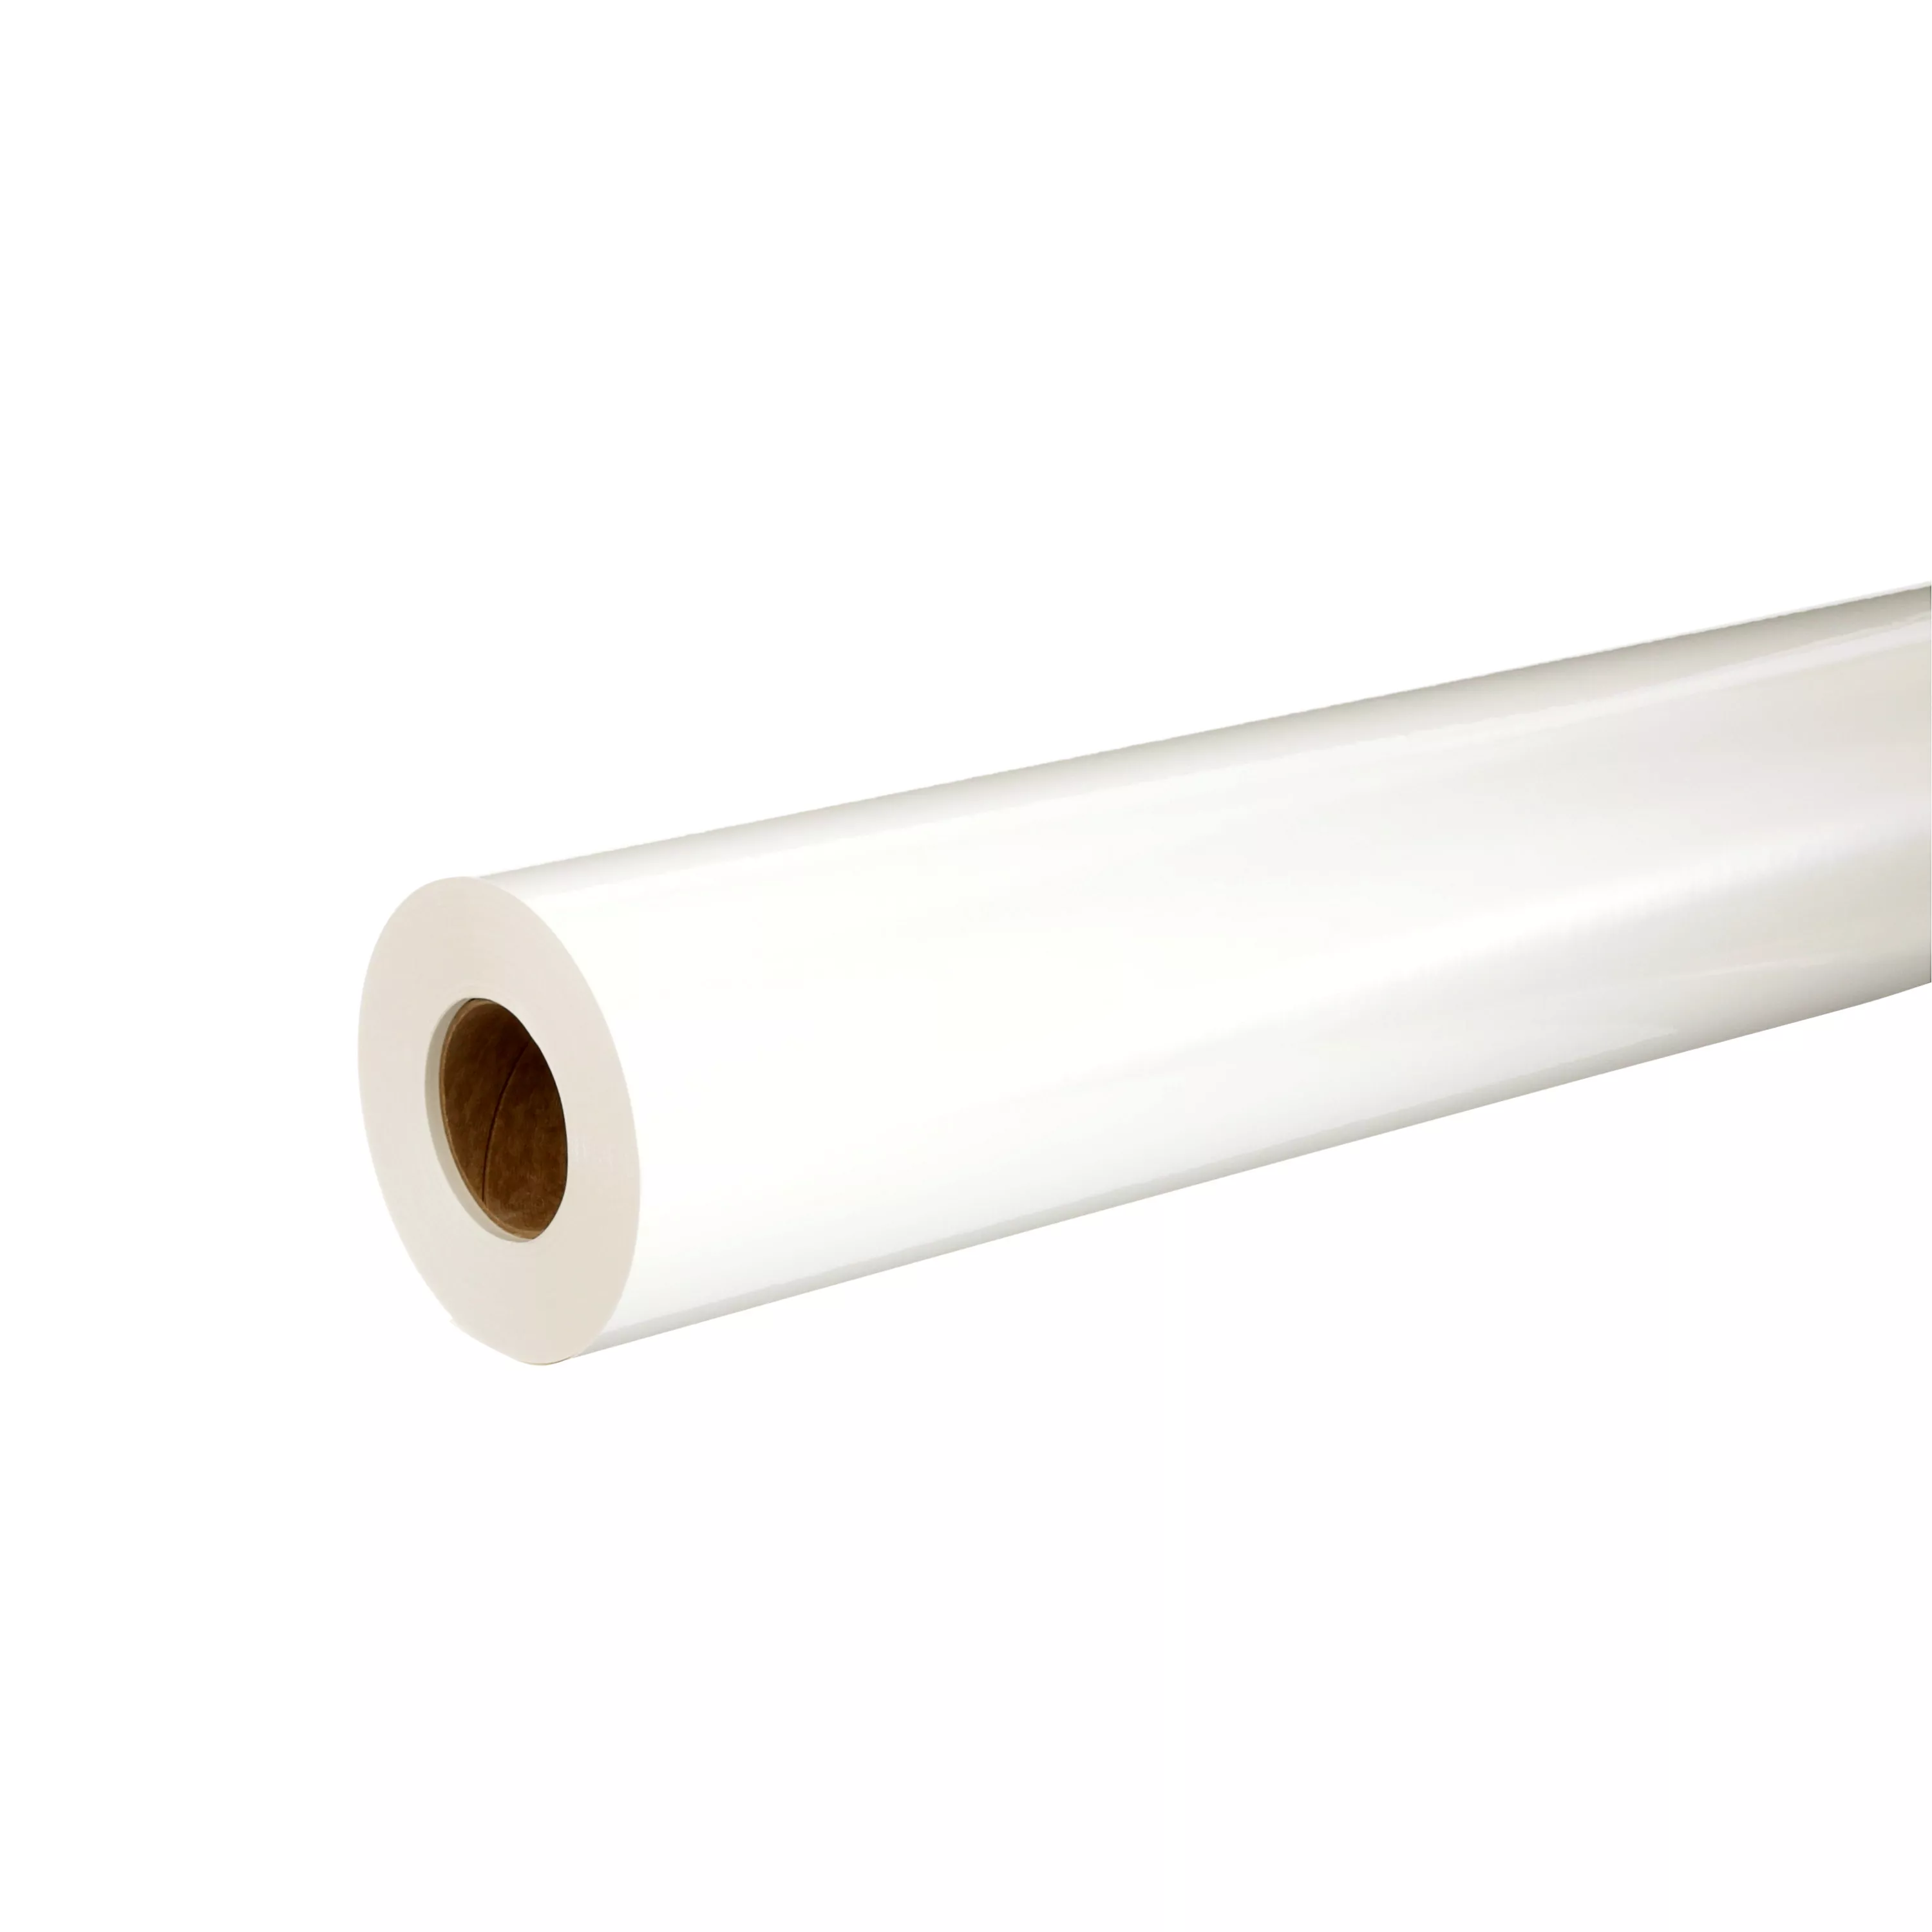 3M™ Advanced Flexible Engineer Grade Reflective Sheeting 7310 White, 4
in x 50 yd